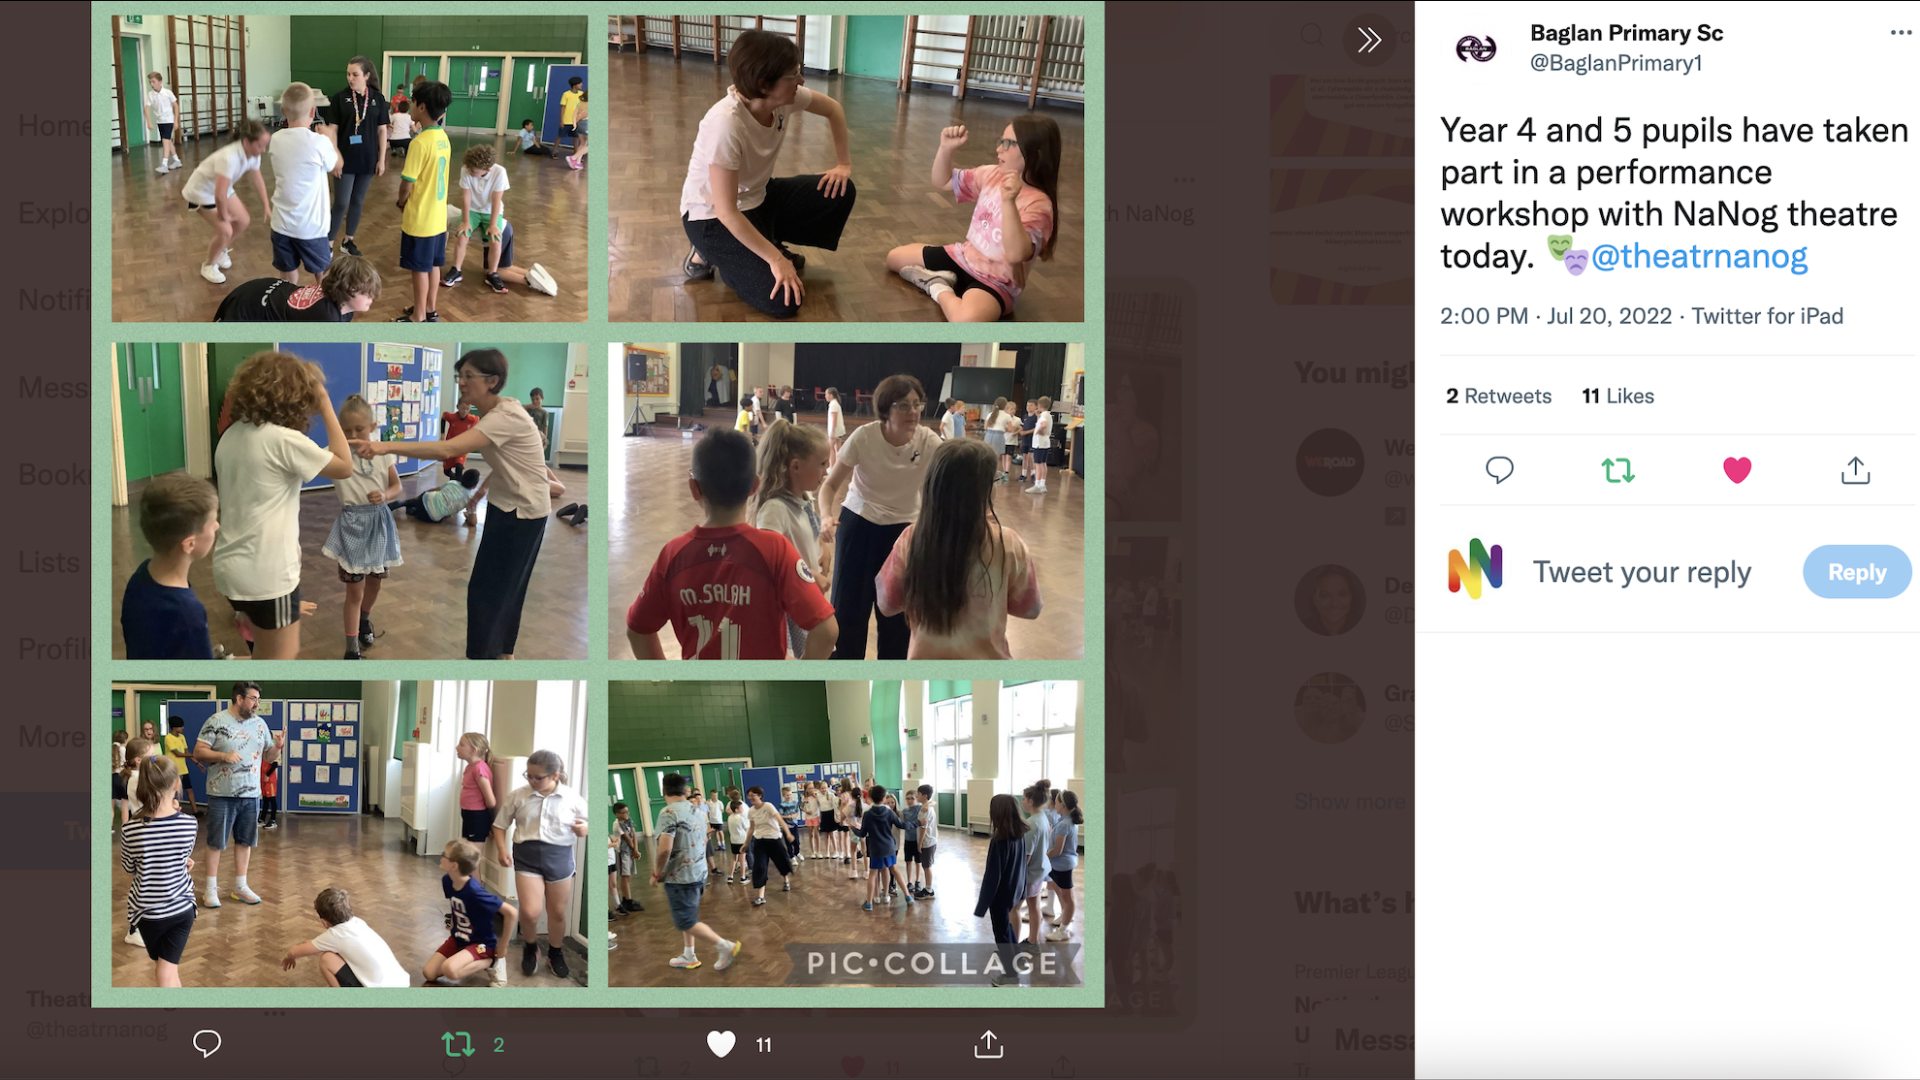 A tweet from Baglan Primary School with a collage of pictures